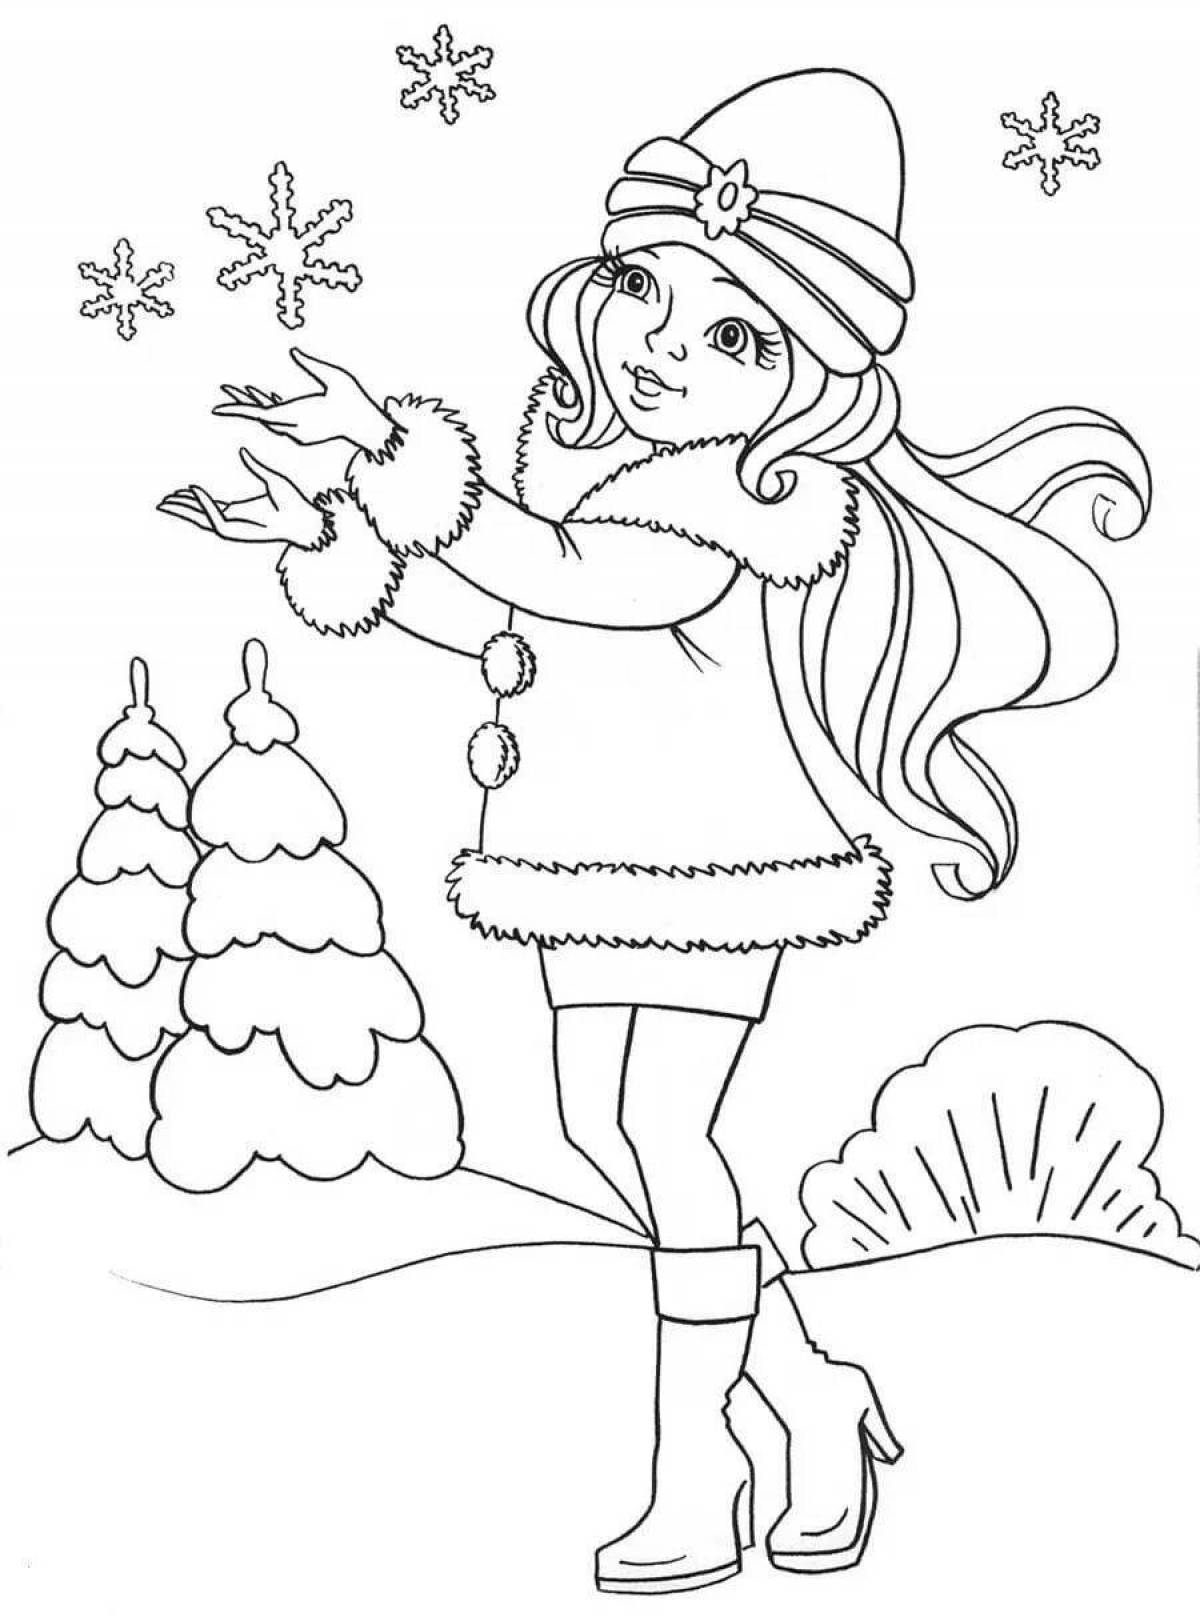 Violent Christmas coloring for girls 12 years old